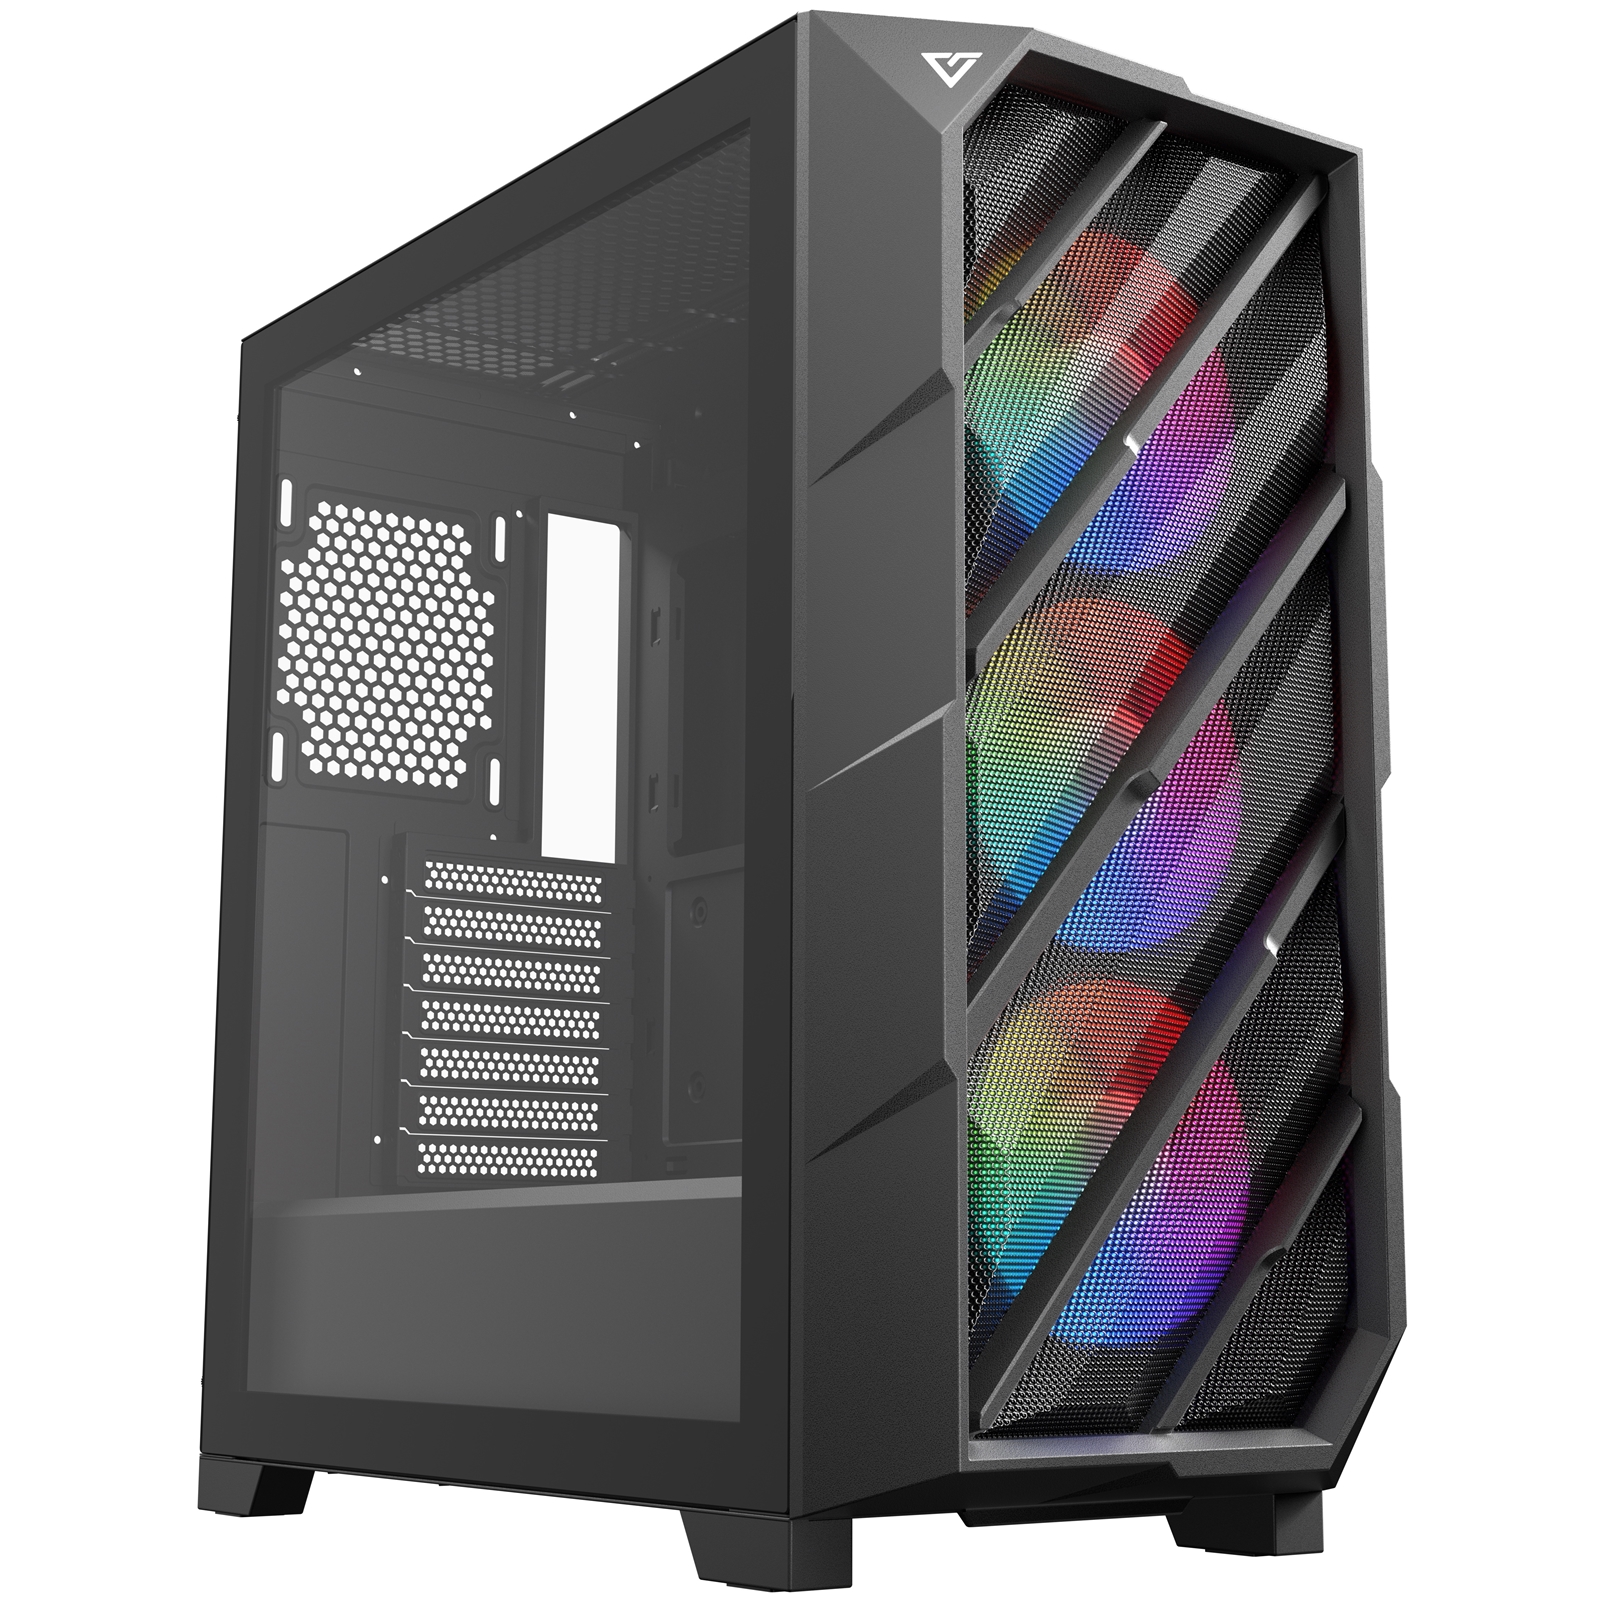 ANTEC DP503 Case, Gaming, Black, Mid Tower, 2 x USB 3.0 / 1 x USB 3.2 Gen 2 Type-C, Tempered Glass Side Window Panels, Mesh Front Panel with Slanted Bar Design for Massive Airflow, Addressable RGB LED Fans, E-ATX, ATX, Micro ATX, Mini-ITX